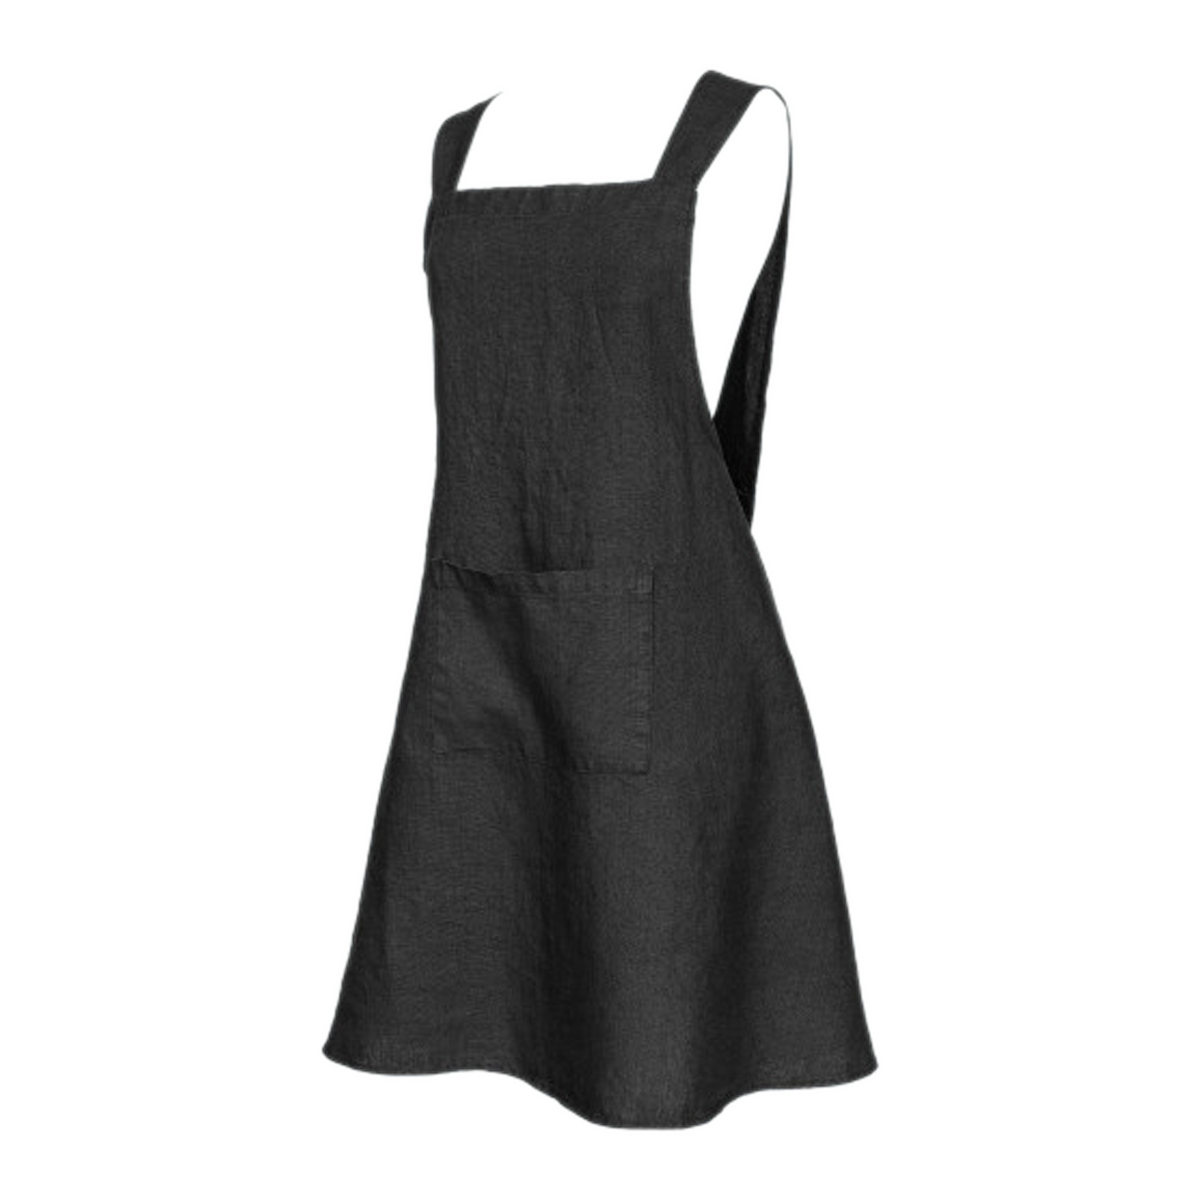 This Linen Apron is designed with comfort in mind.